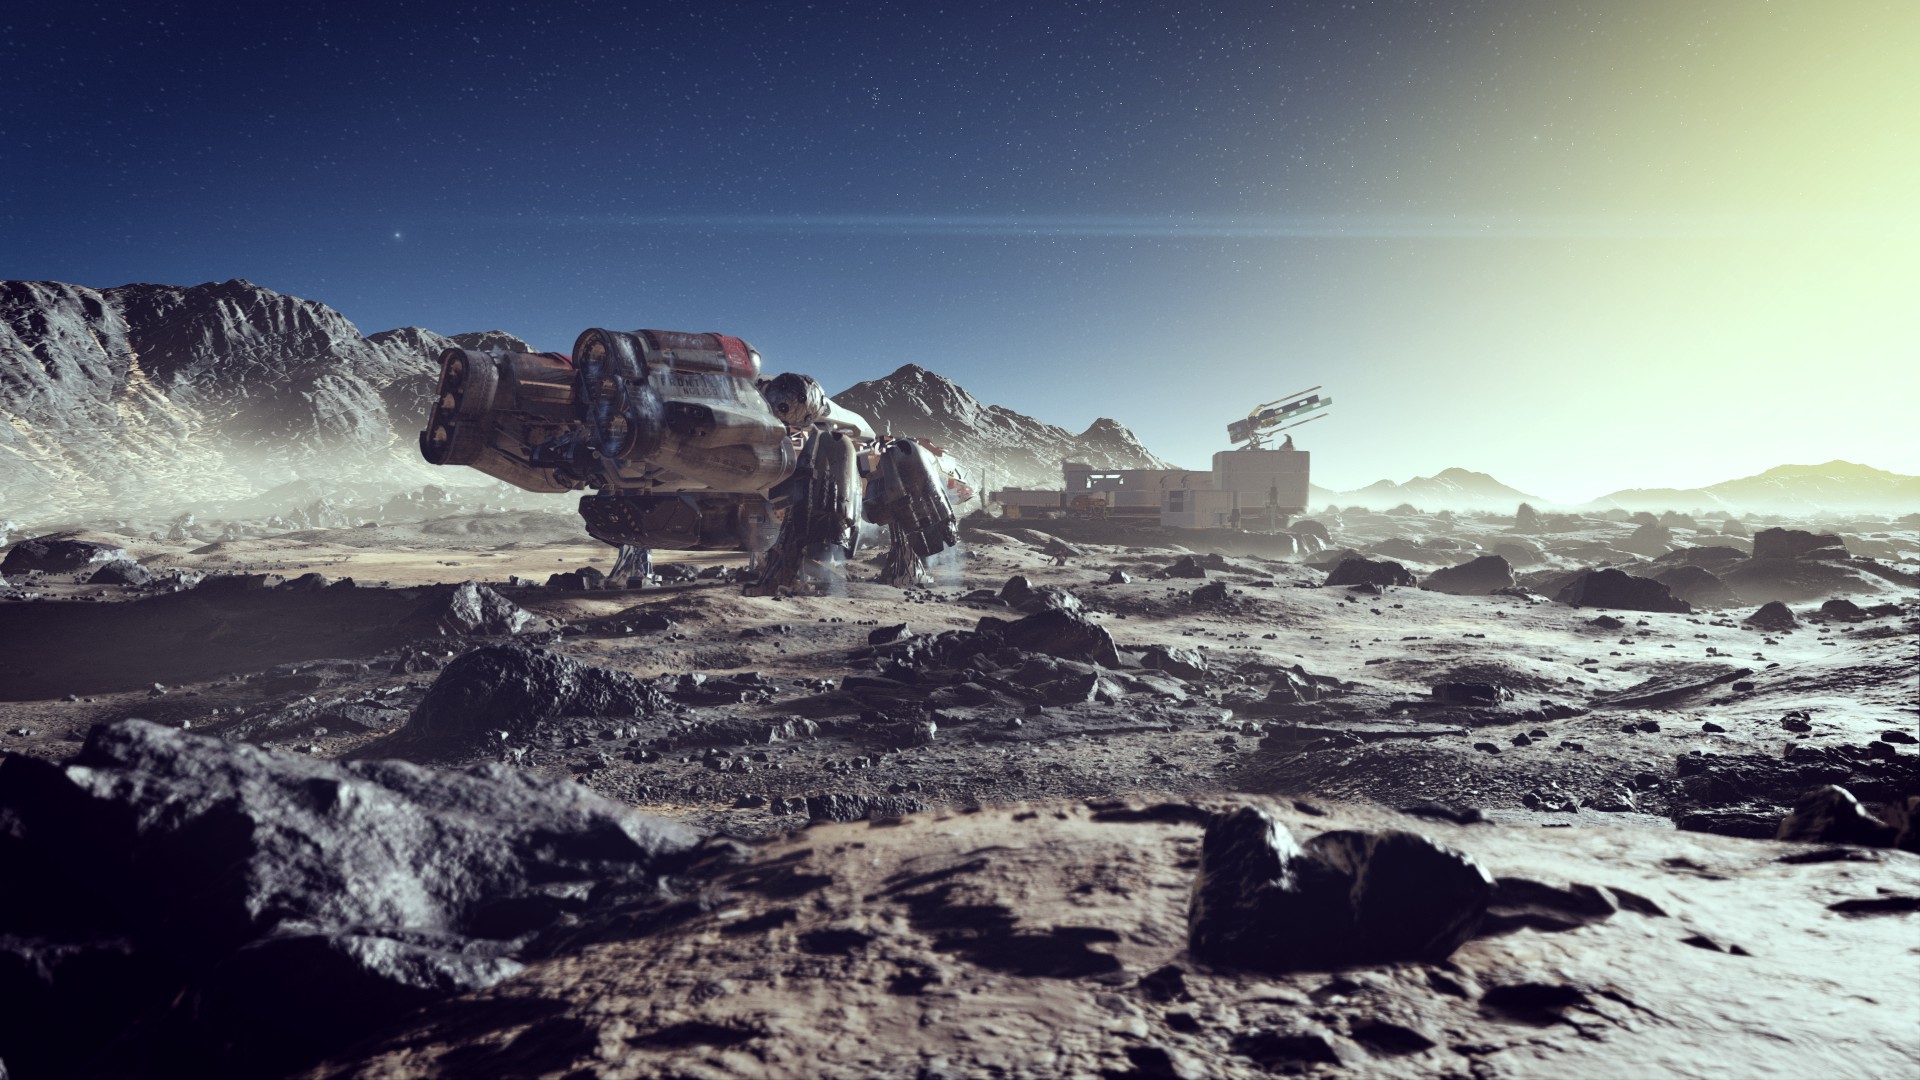 Starfield life on planets: A spaceshp touches down on a desolate planet in Bethesda RPG game Starfield